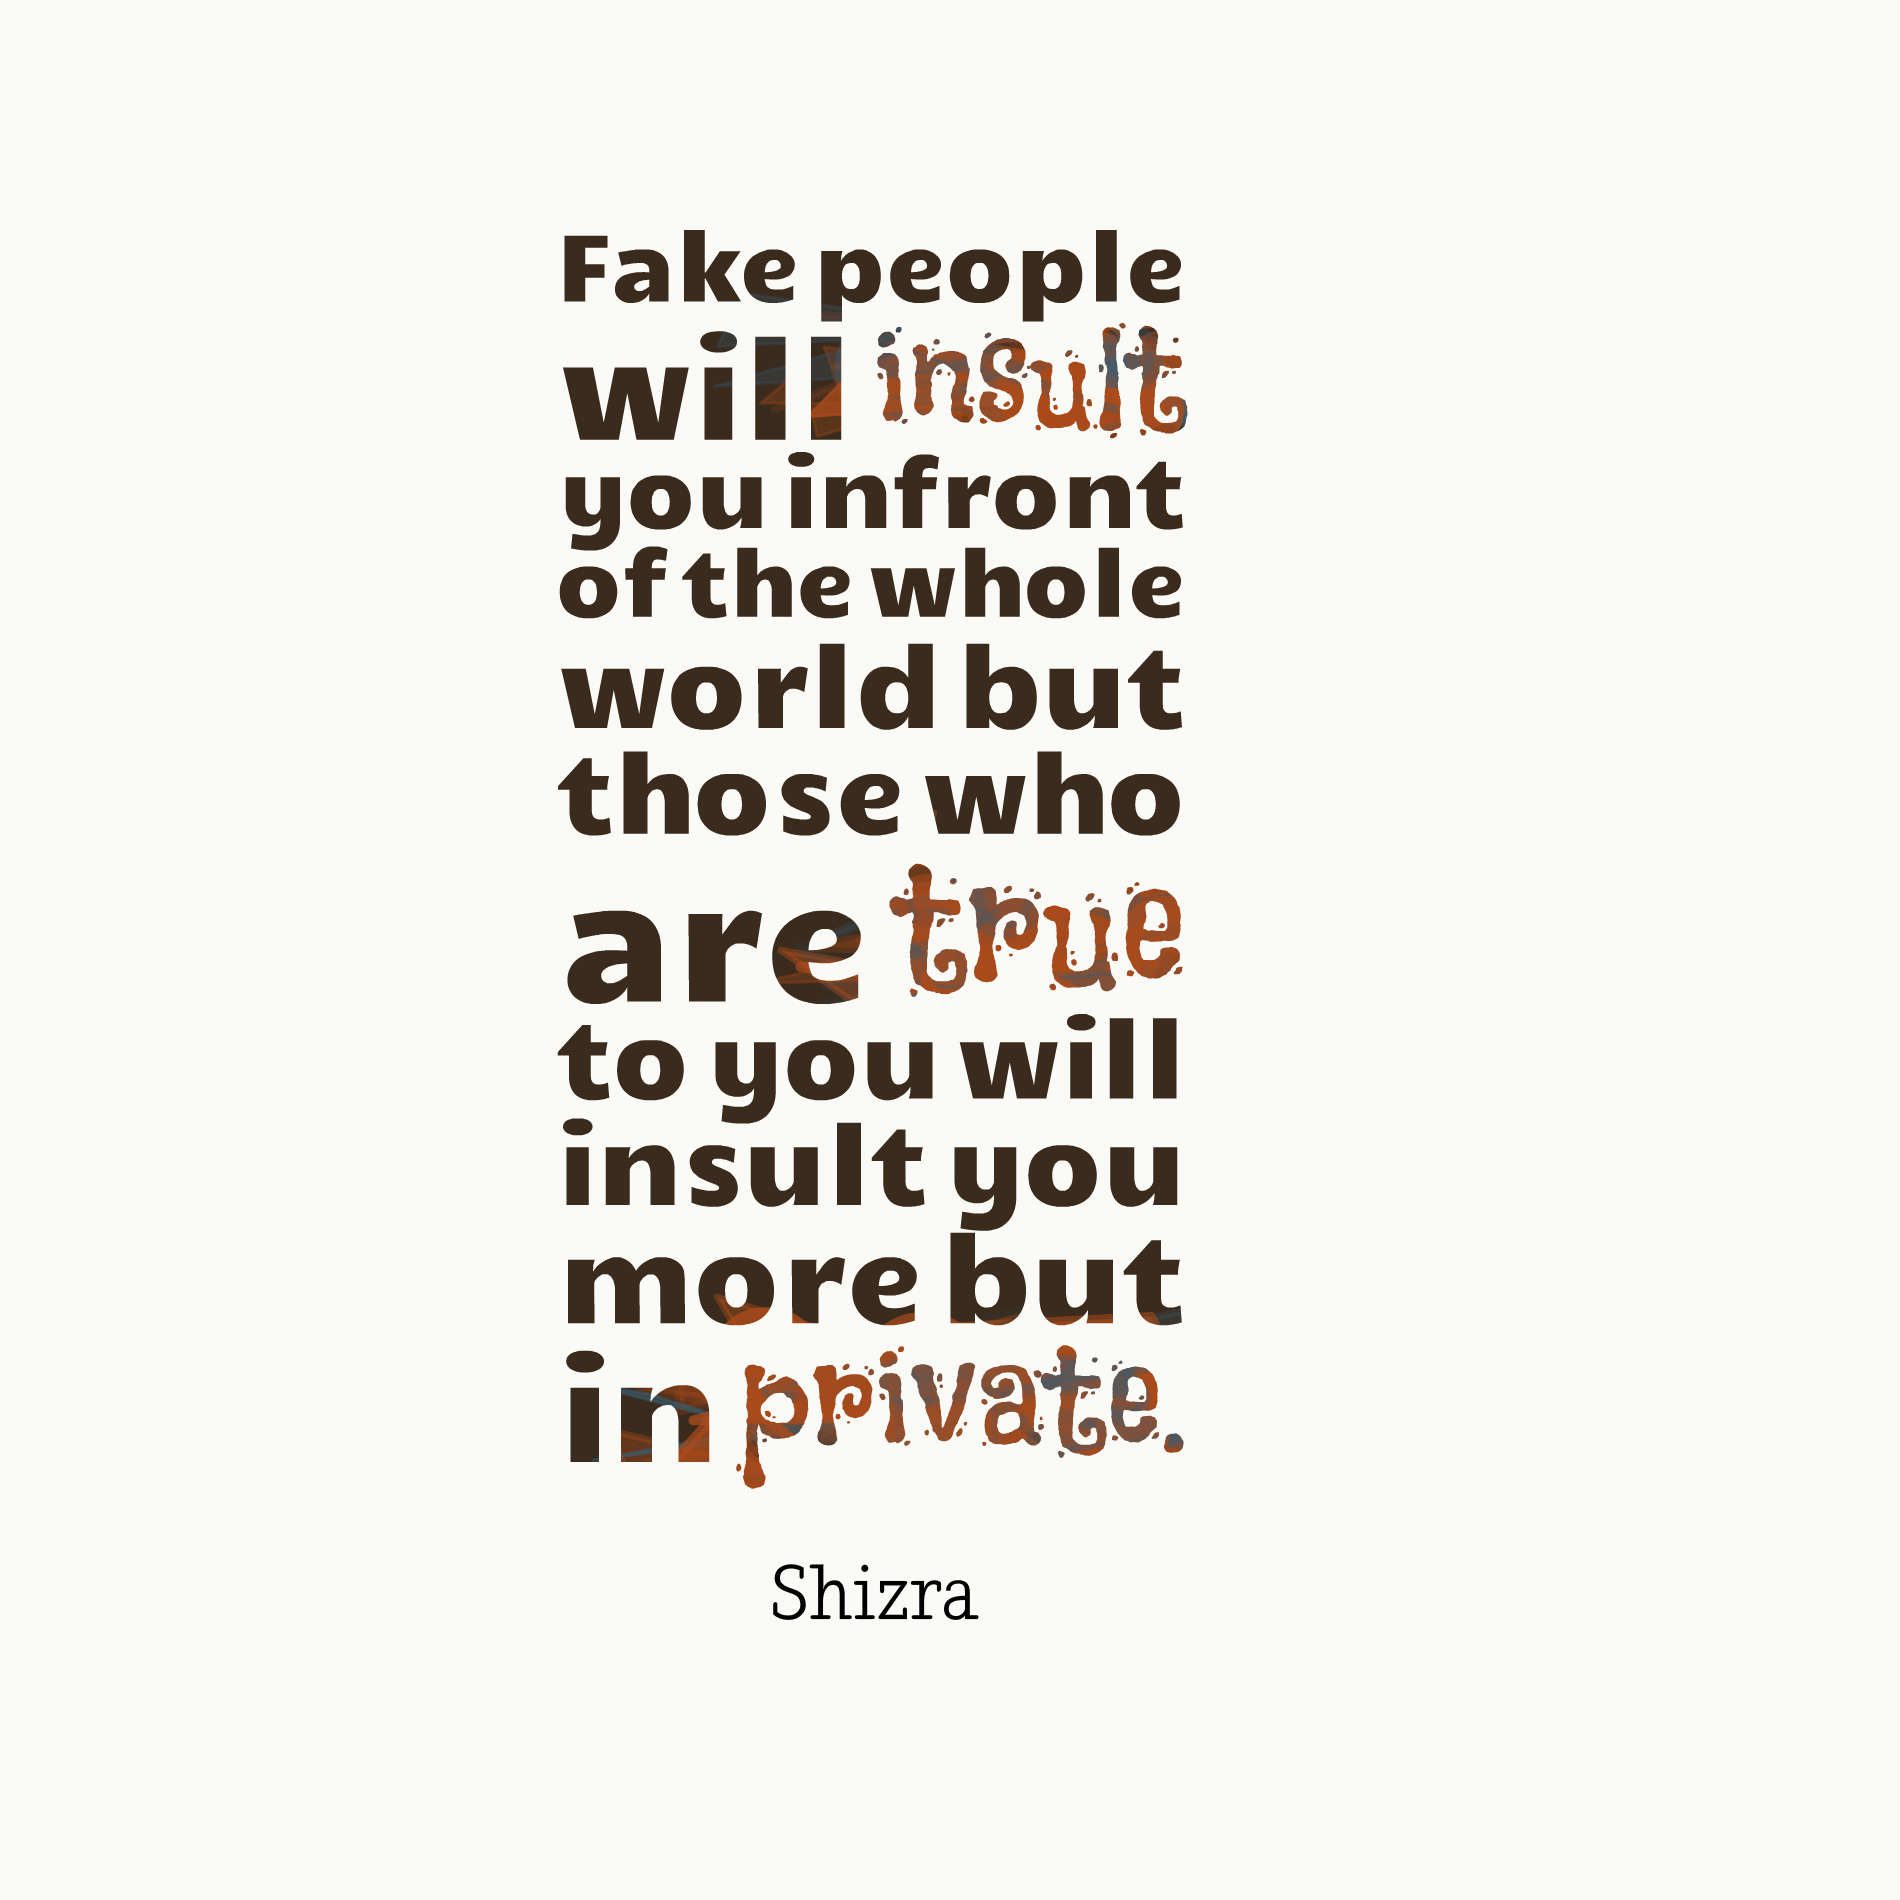 Fake people will insult you infront of the whole world but those who are true to you will insult you more but in private.